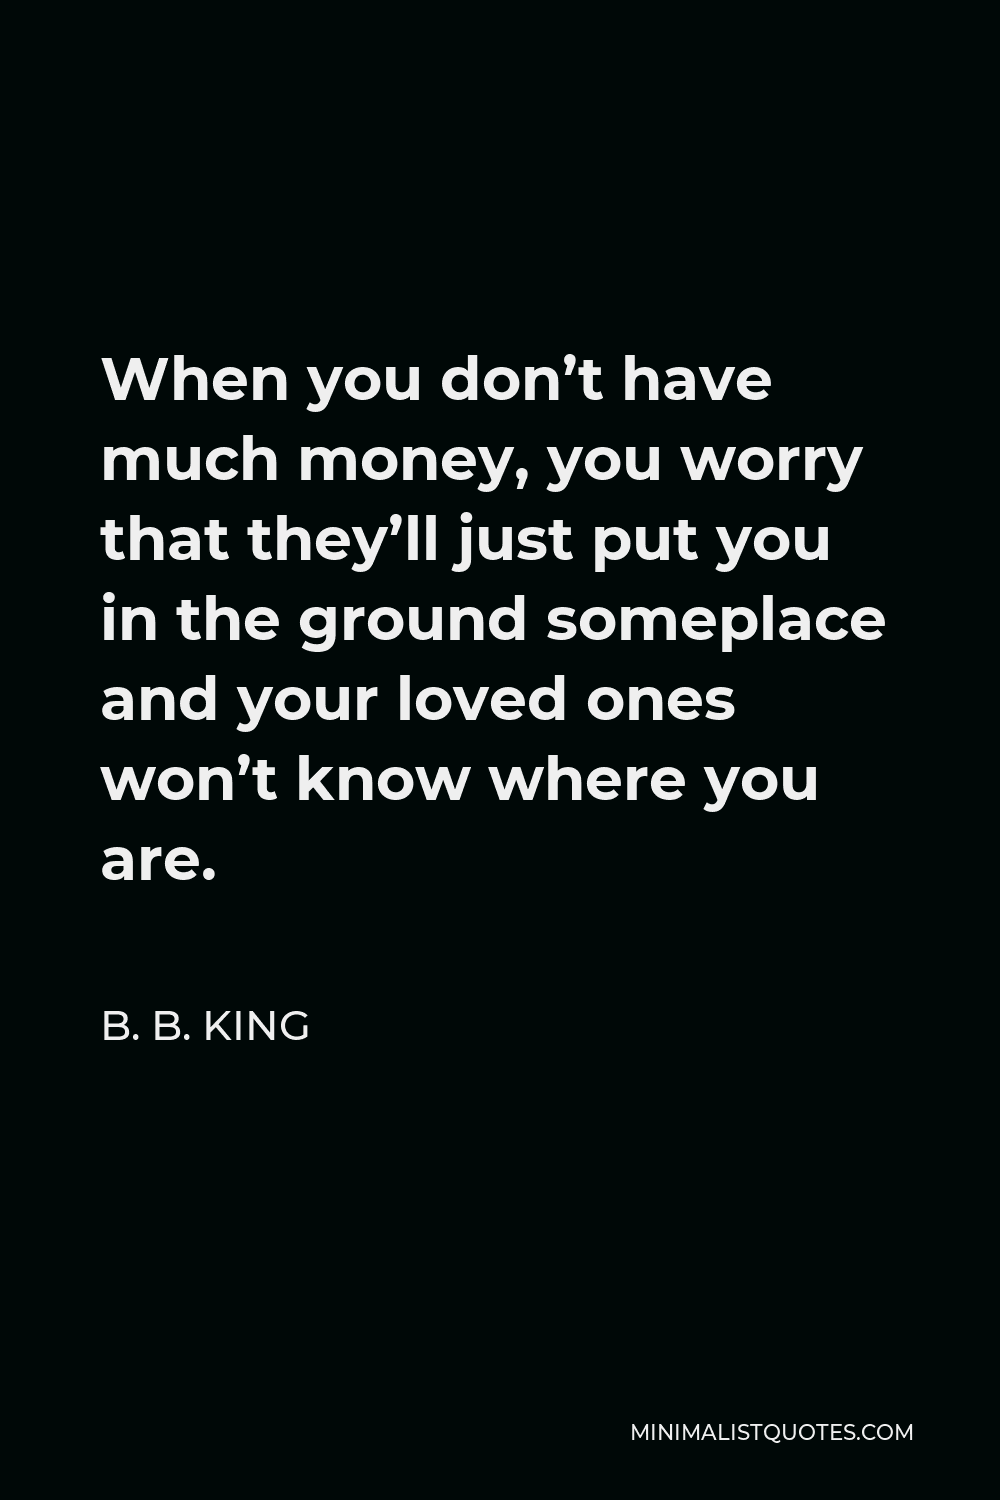 B. B. King Quote - When you don’t have much money, you worry that they’ll just put you in the ground someplace and your loved ones won’t know where you are.